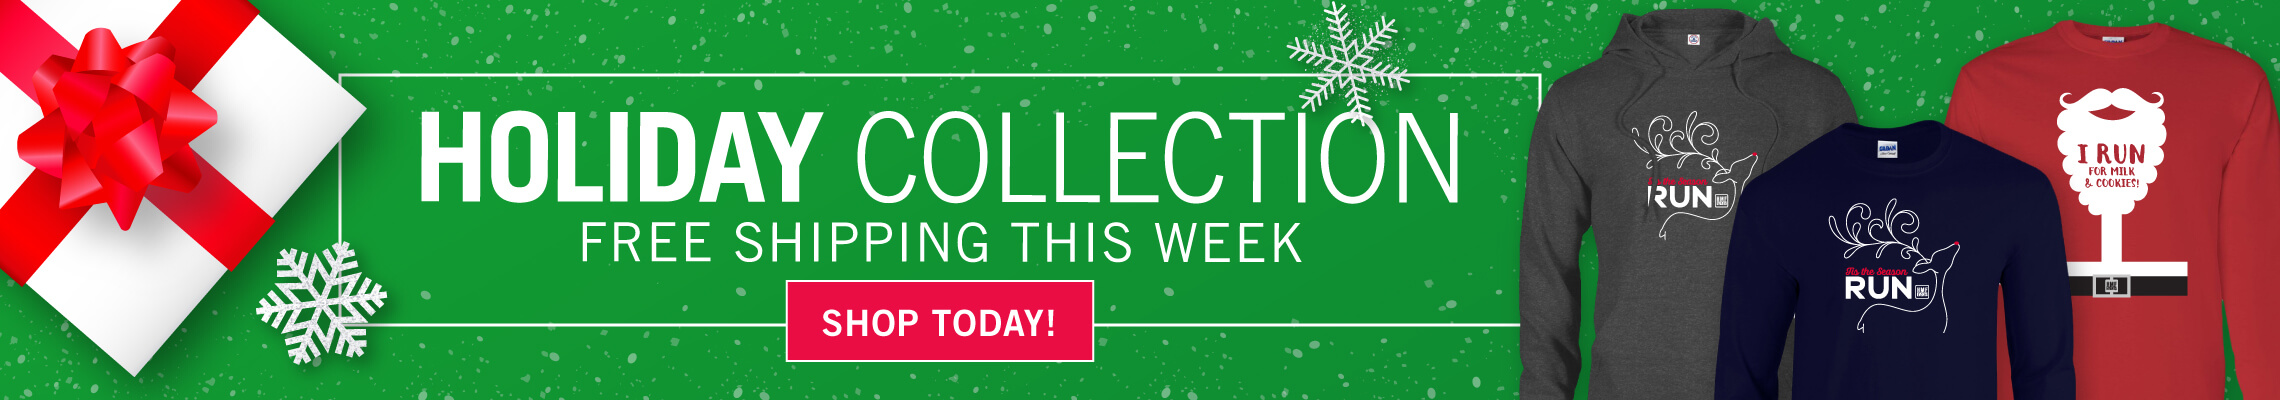 Holiday Collection, Free shipping this week, Shop Today!